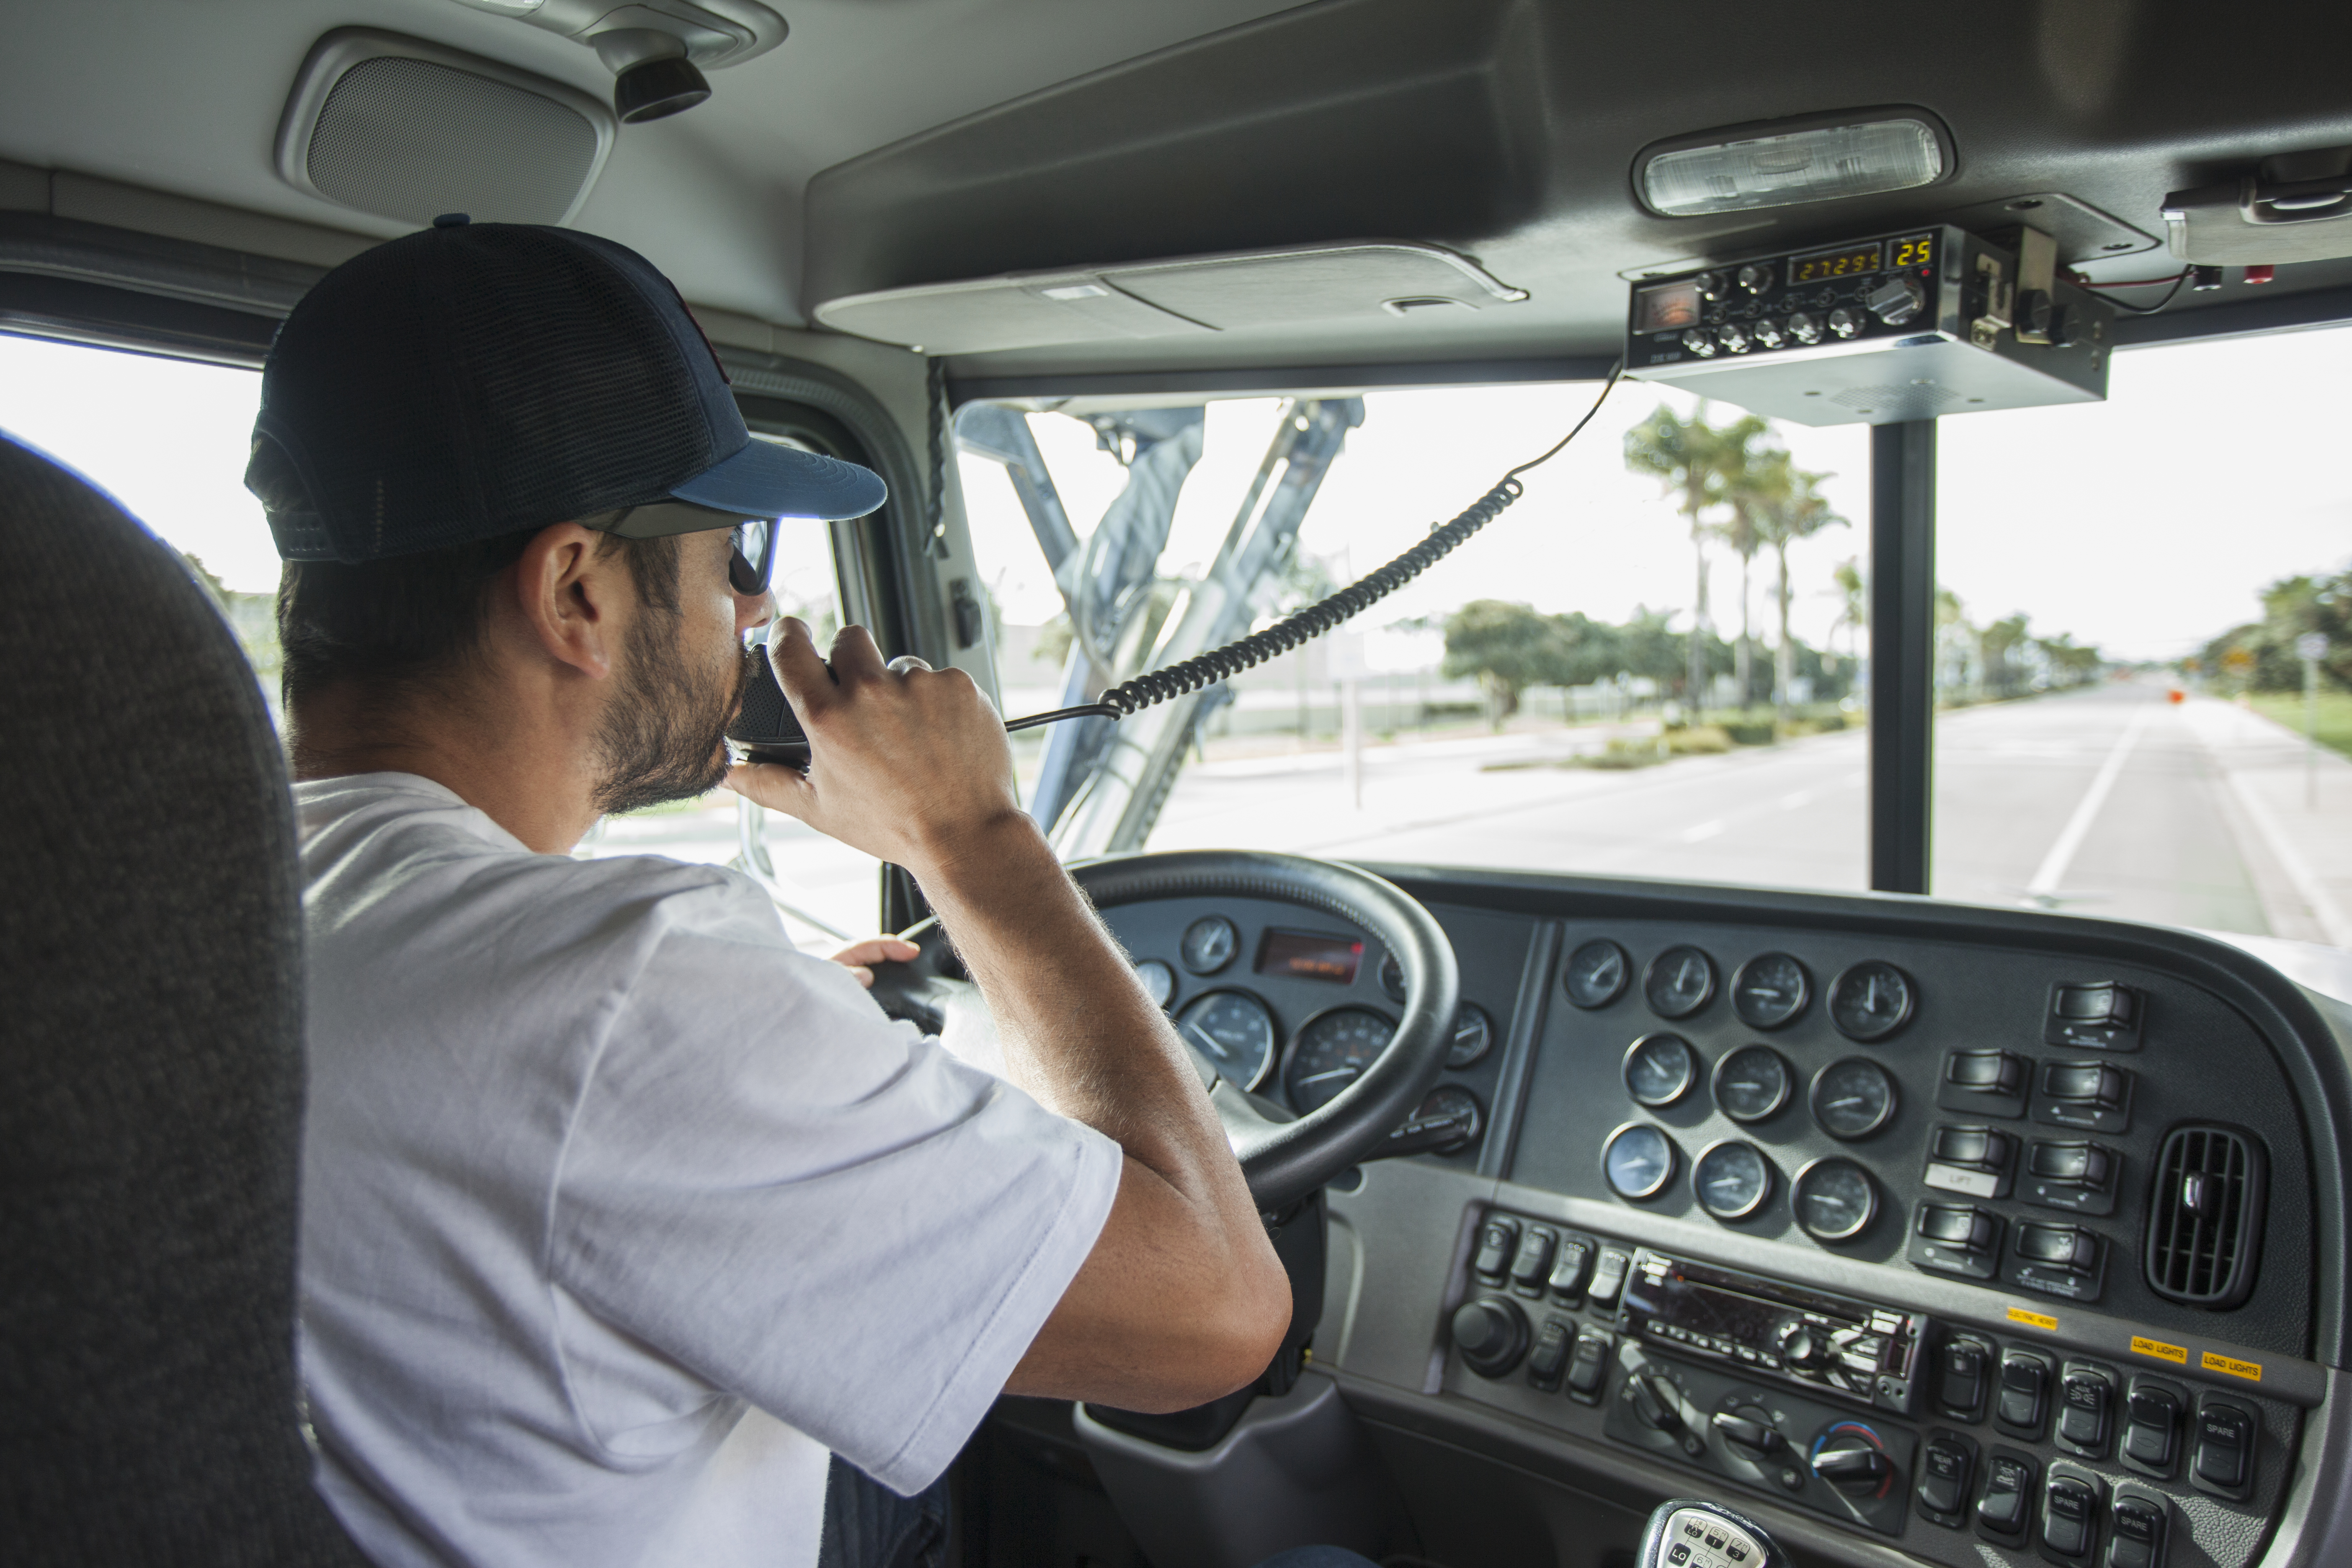 How To Hire Truck Drivers